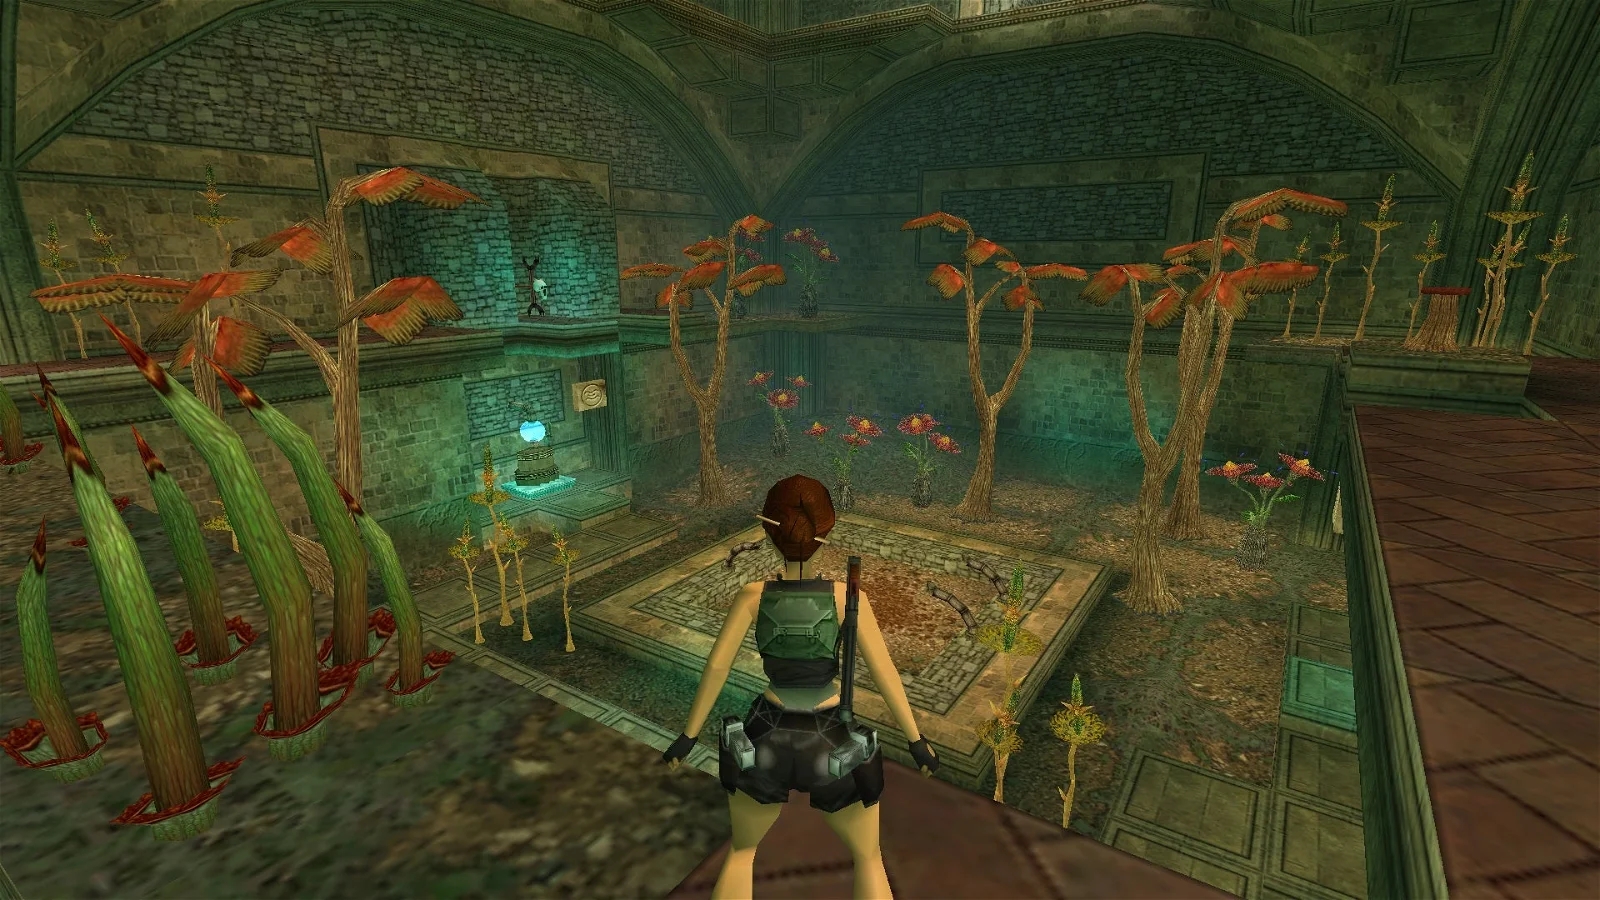 A video game screenshot showing Lara Croft overlooking an underwater room filled with coral and aquatic plants.